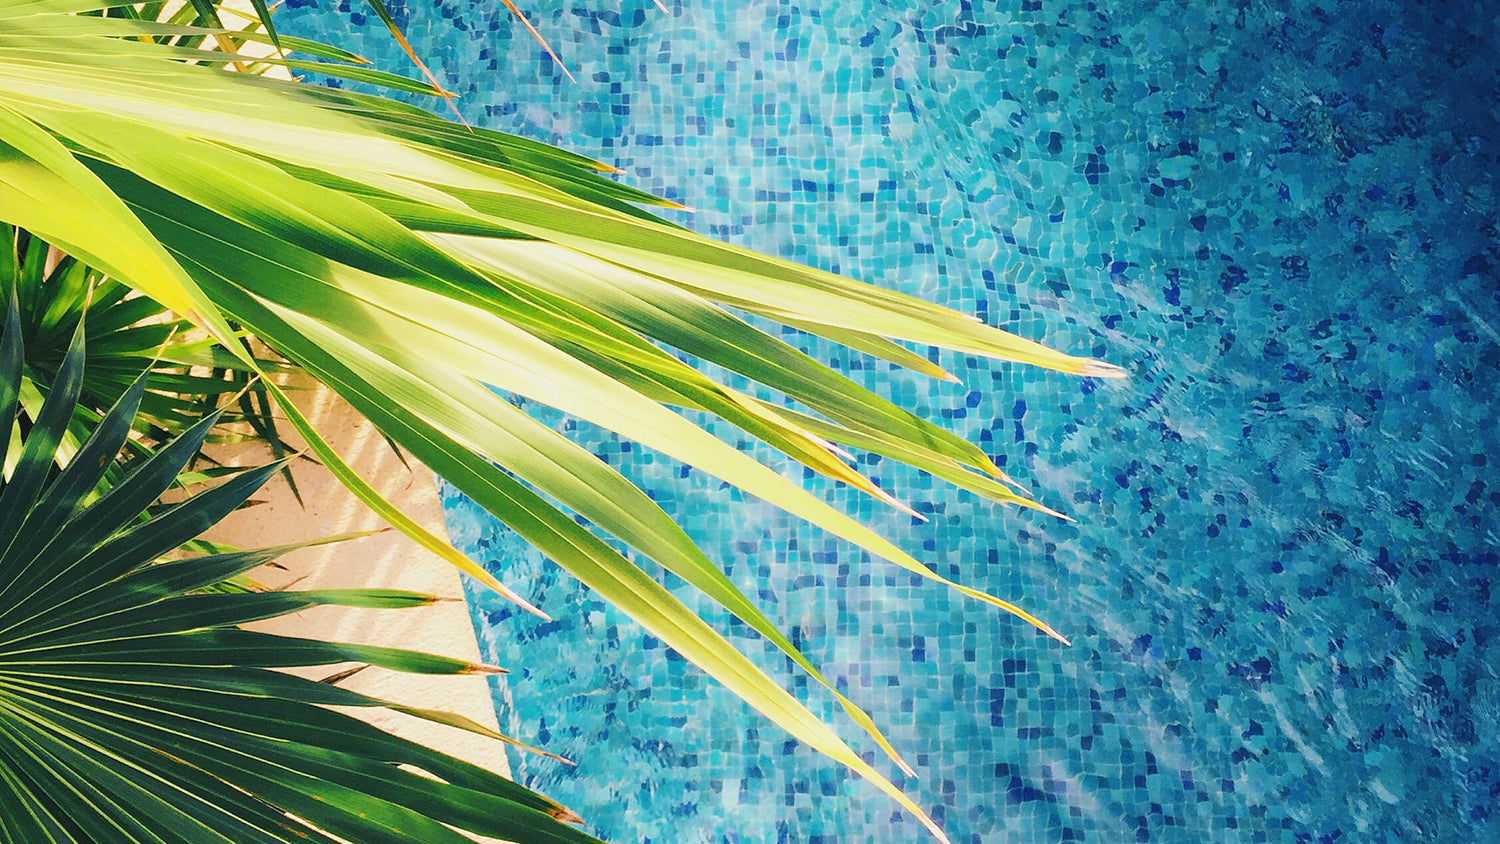 Birds eye view of swimming pool with palm tree over hanging. Beautiful bright blue and green.